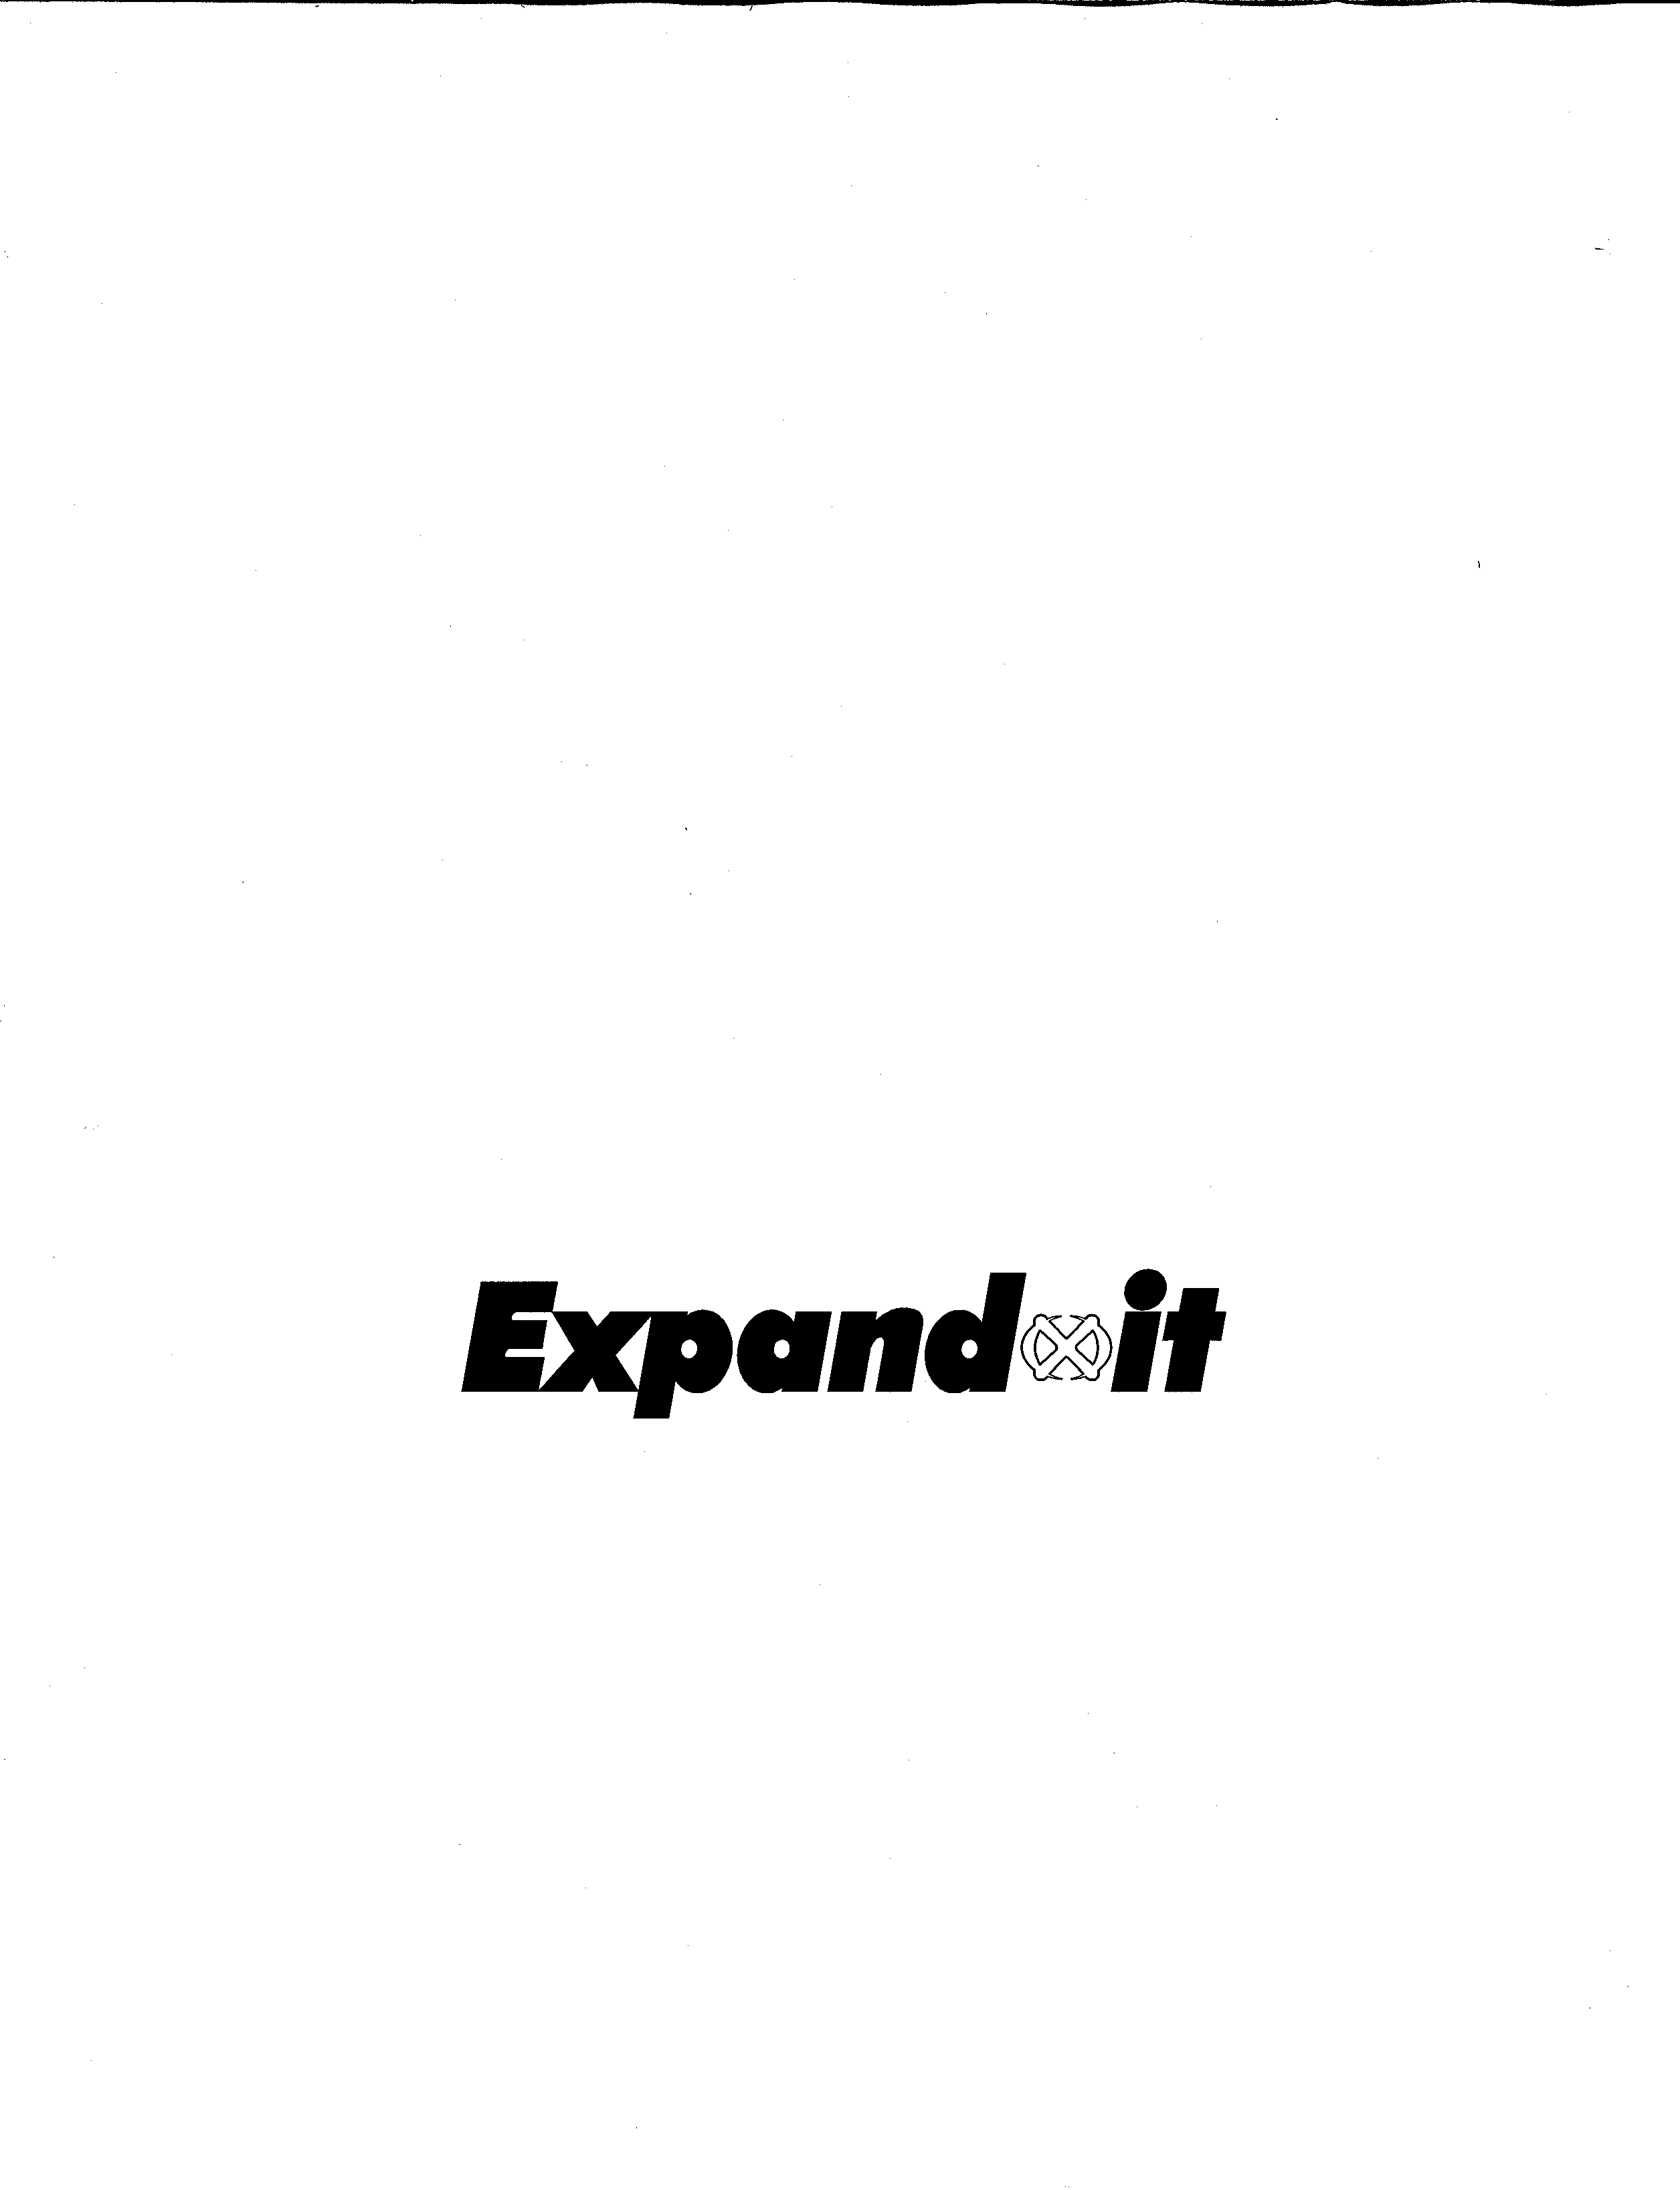  EXPAND IT